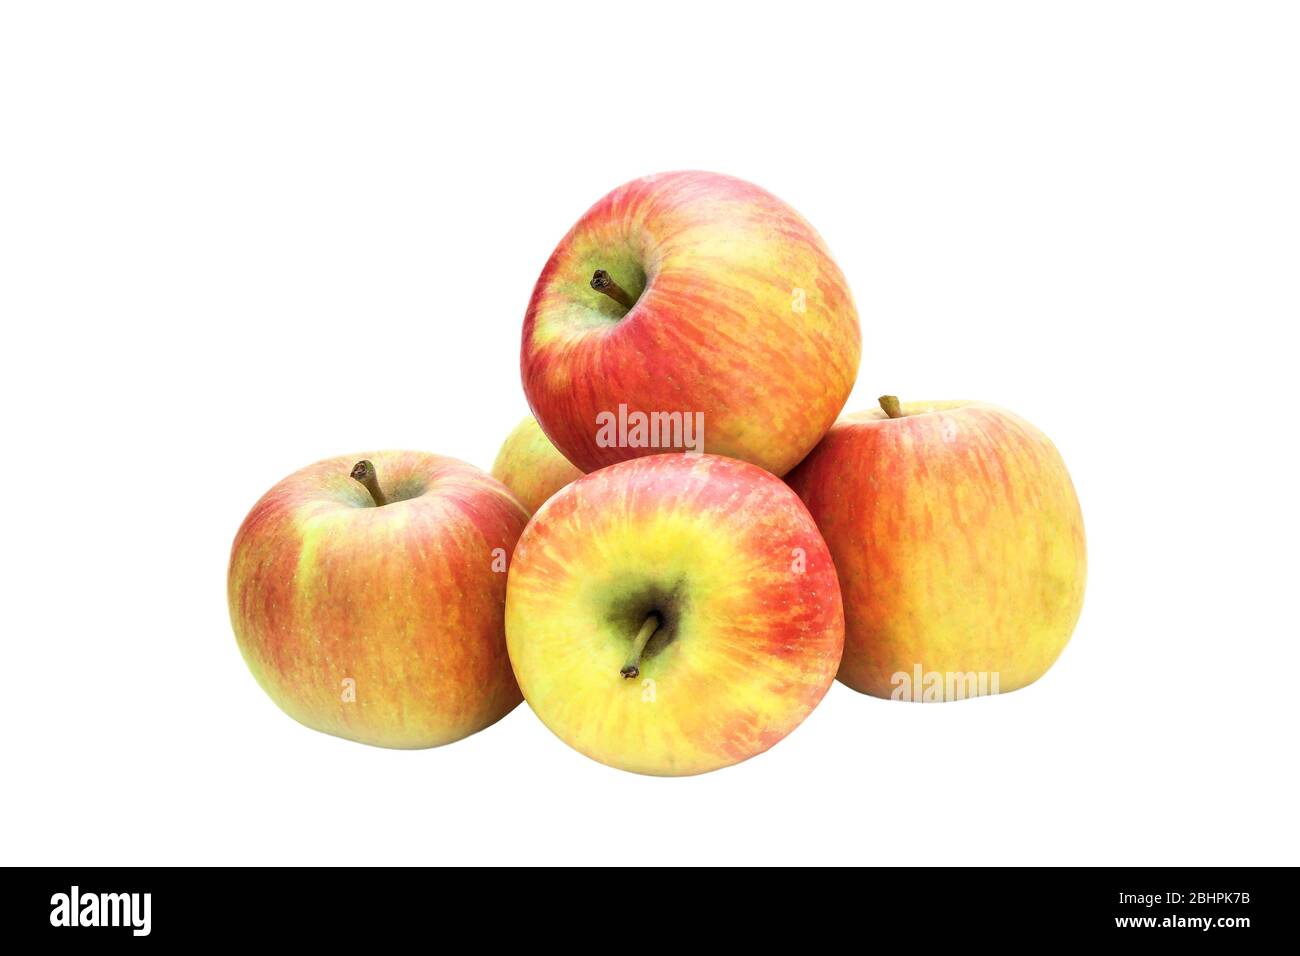 image fruit red-yellow apples on a white background Stock Photo